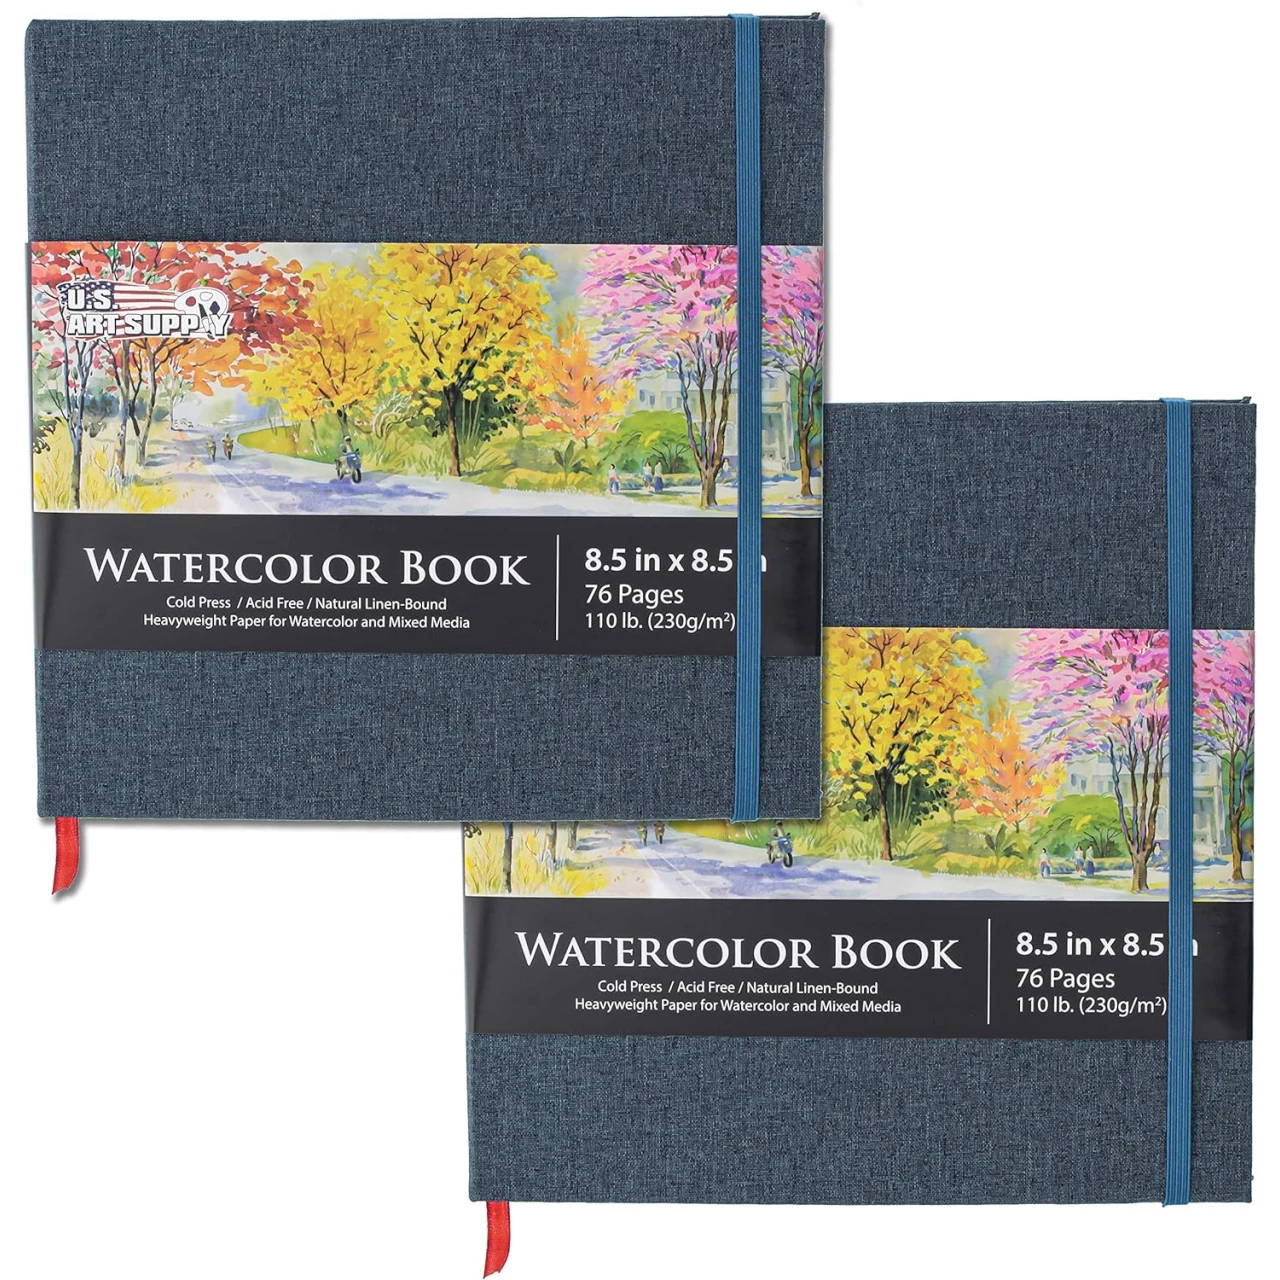 U.S. Art Supply 8.5&quot; x 8.5&quot; Watercolor Book, 2 Pack, 76 Sheets, 110 lb (230 GSM) - Linen-Bound Hardcover Artists Paper Pads - Acid-Free, Cold-Pressed, Brush Painting &amp; Drawing Sketchbook Mixed Media